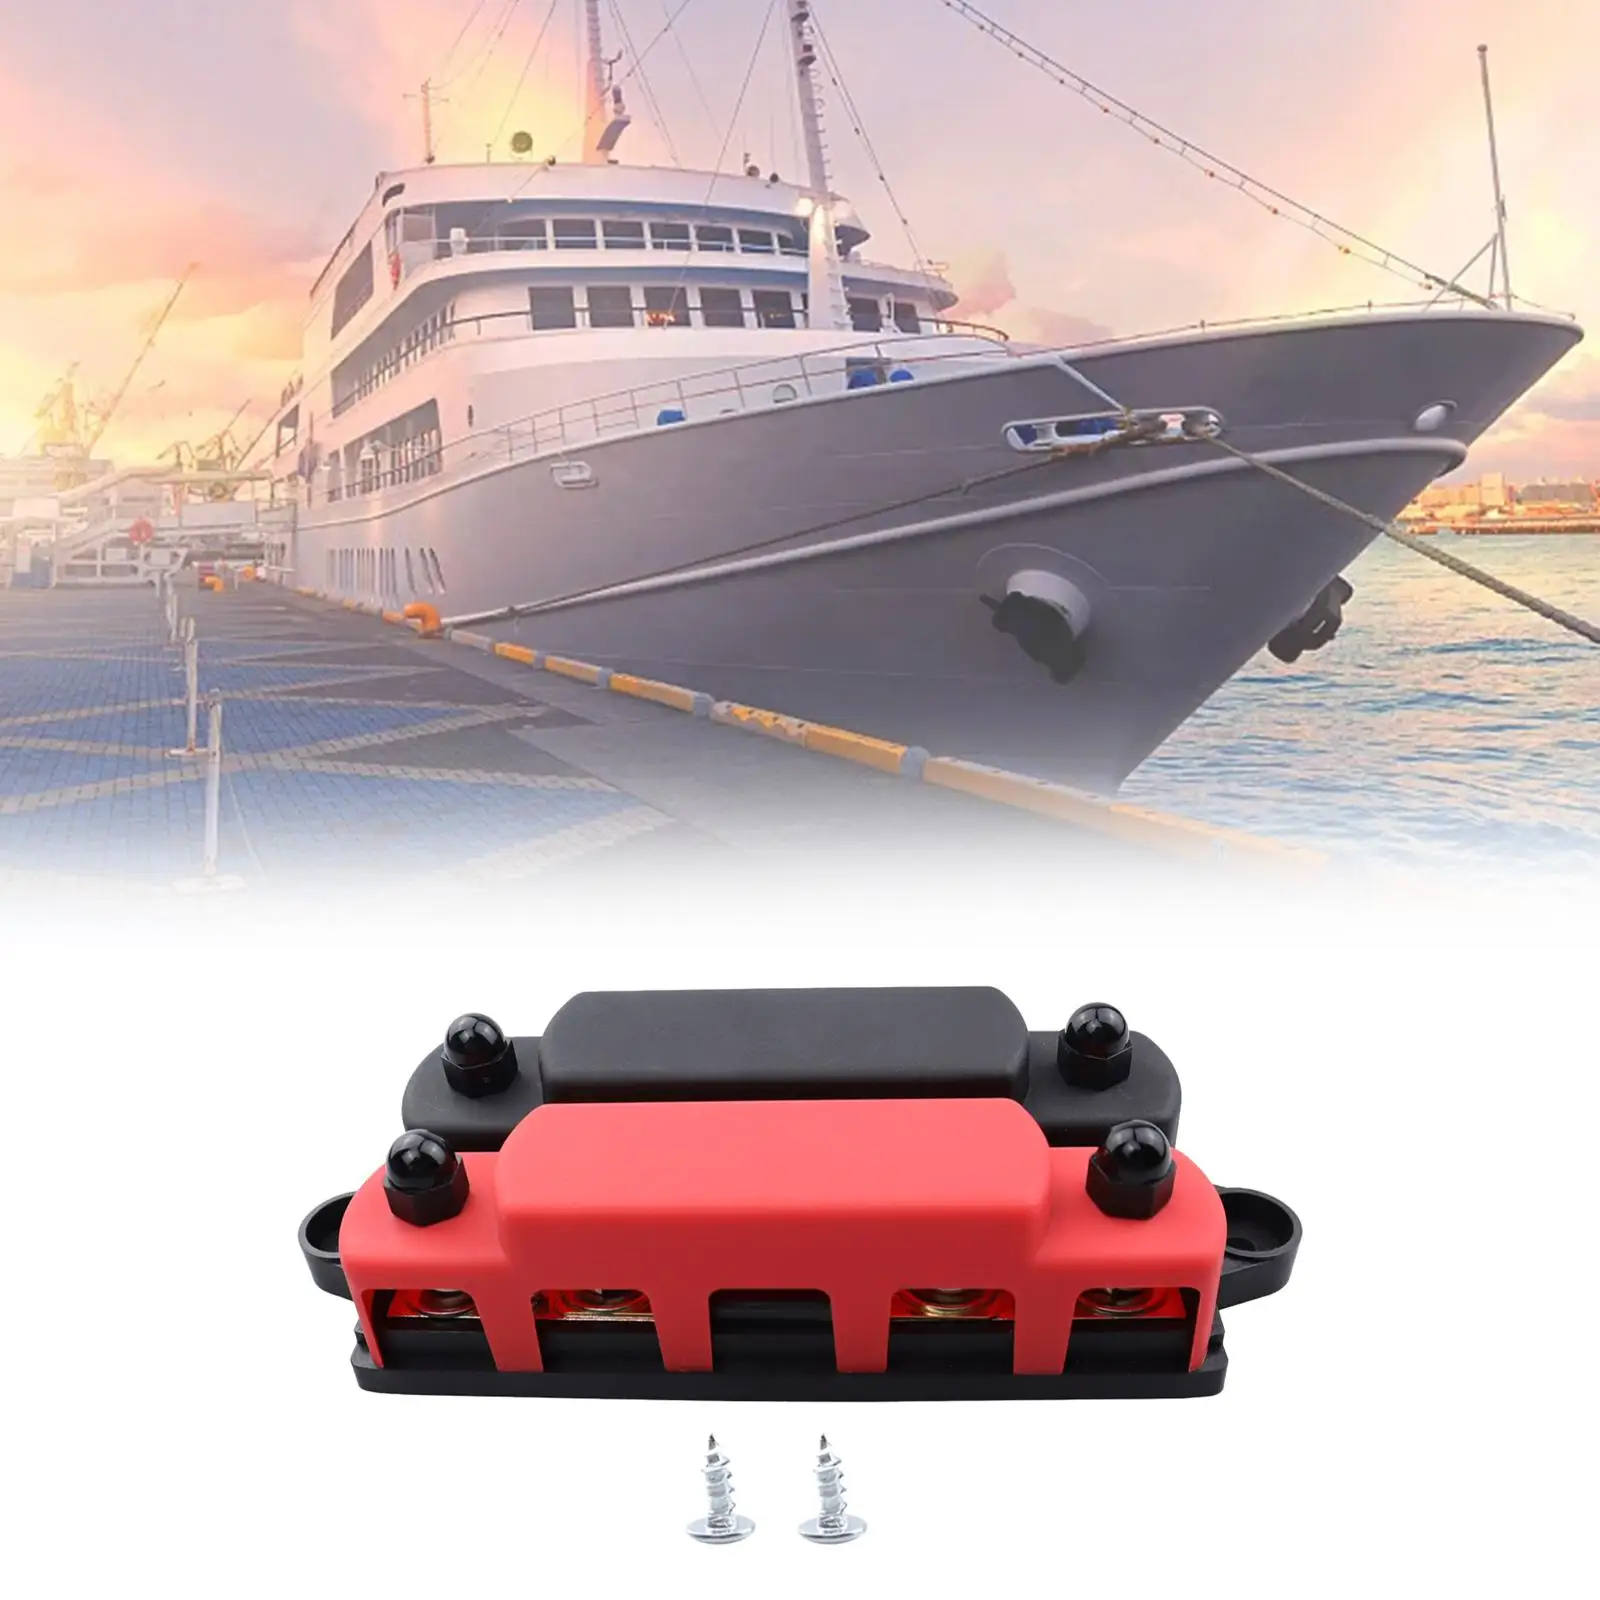 4 Way Power Distribution Bus Bar Terminal with Cover for Marine RV